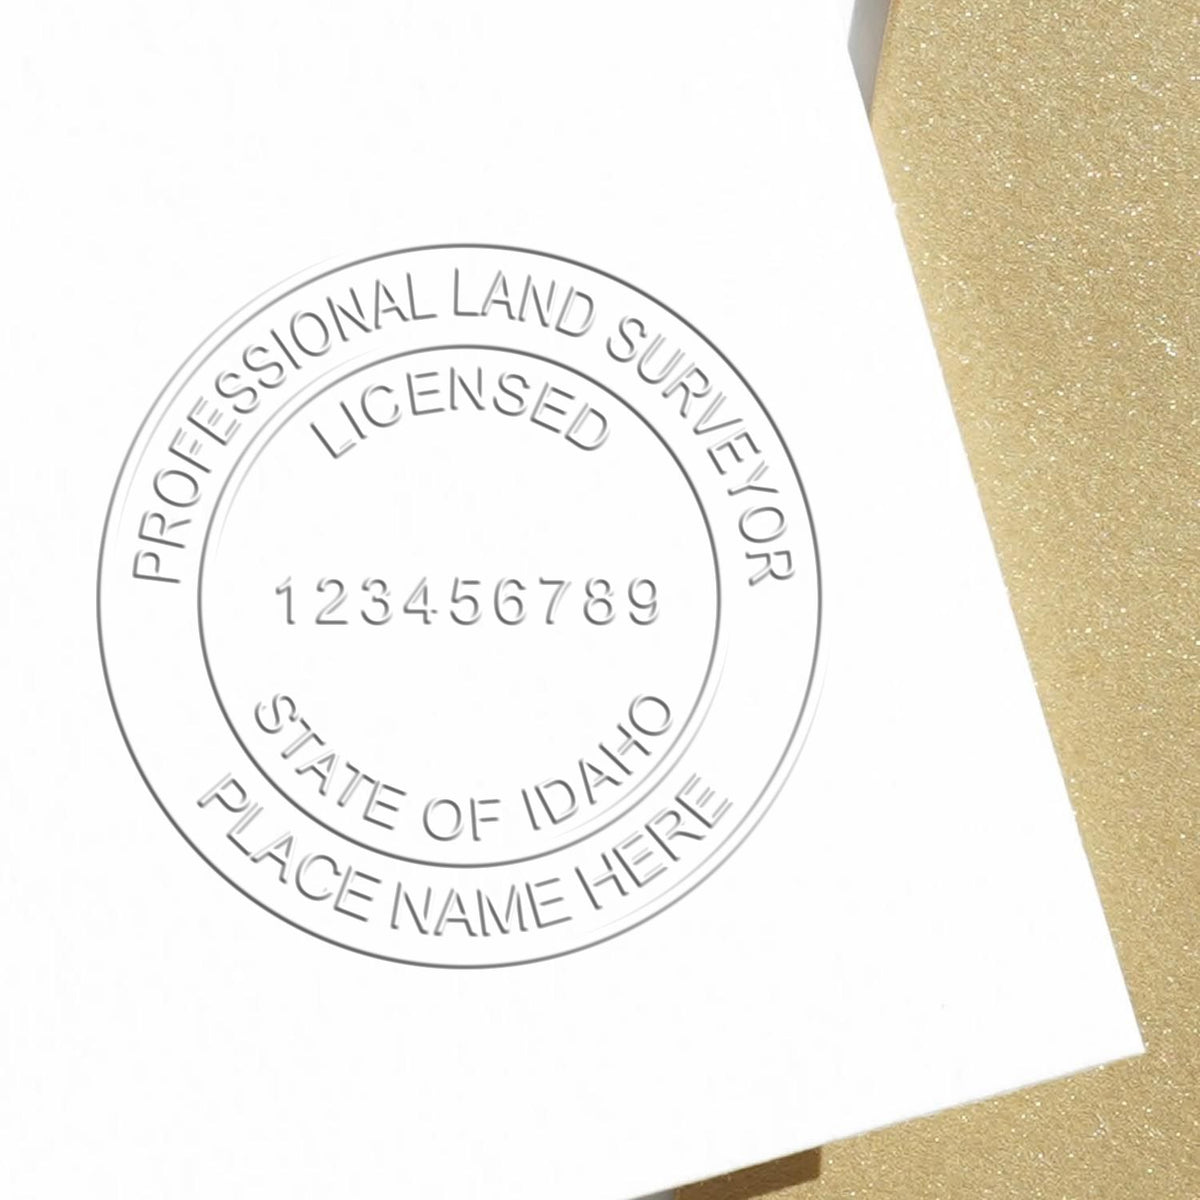 A lifestyle photo showing a stamped image of the Handheld Idaho Land Surveyor Seal on a piece of paper